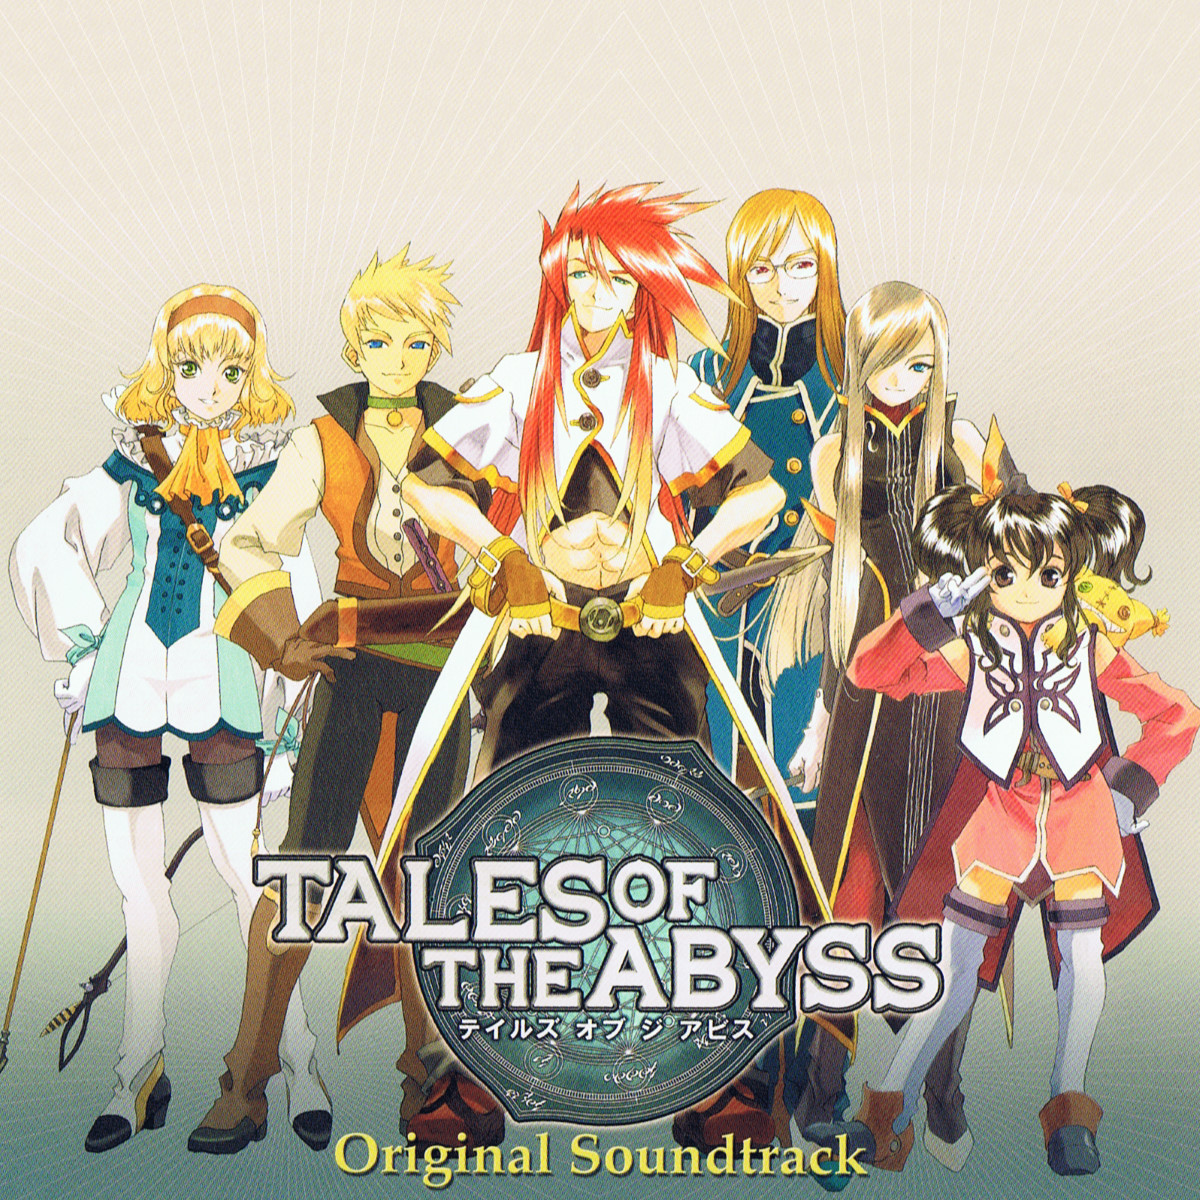 TALES OF THE ABYSS Original Soundtrack (2006) MP3 - Download TALES OF THE  ABYSS Original Soundtrack (2006) Soundtracks for FREE!